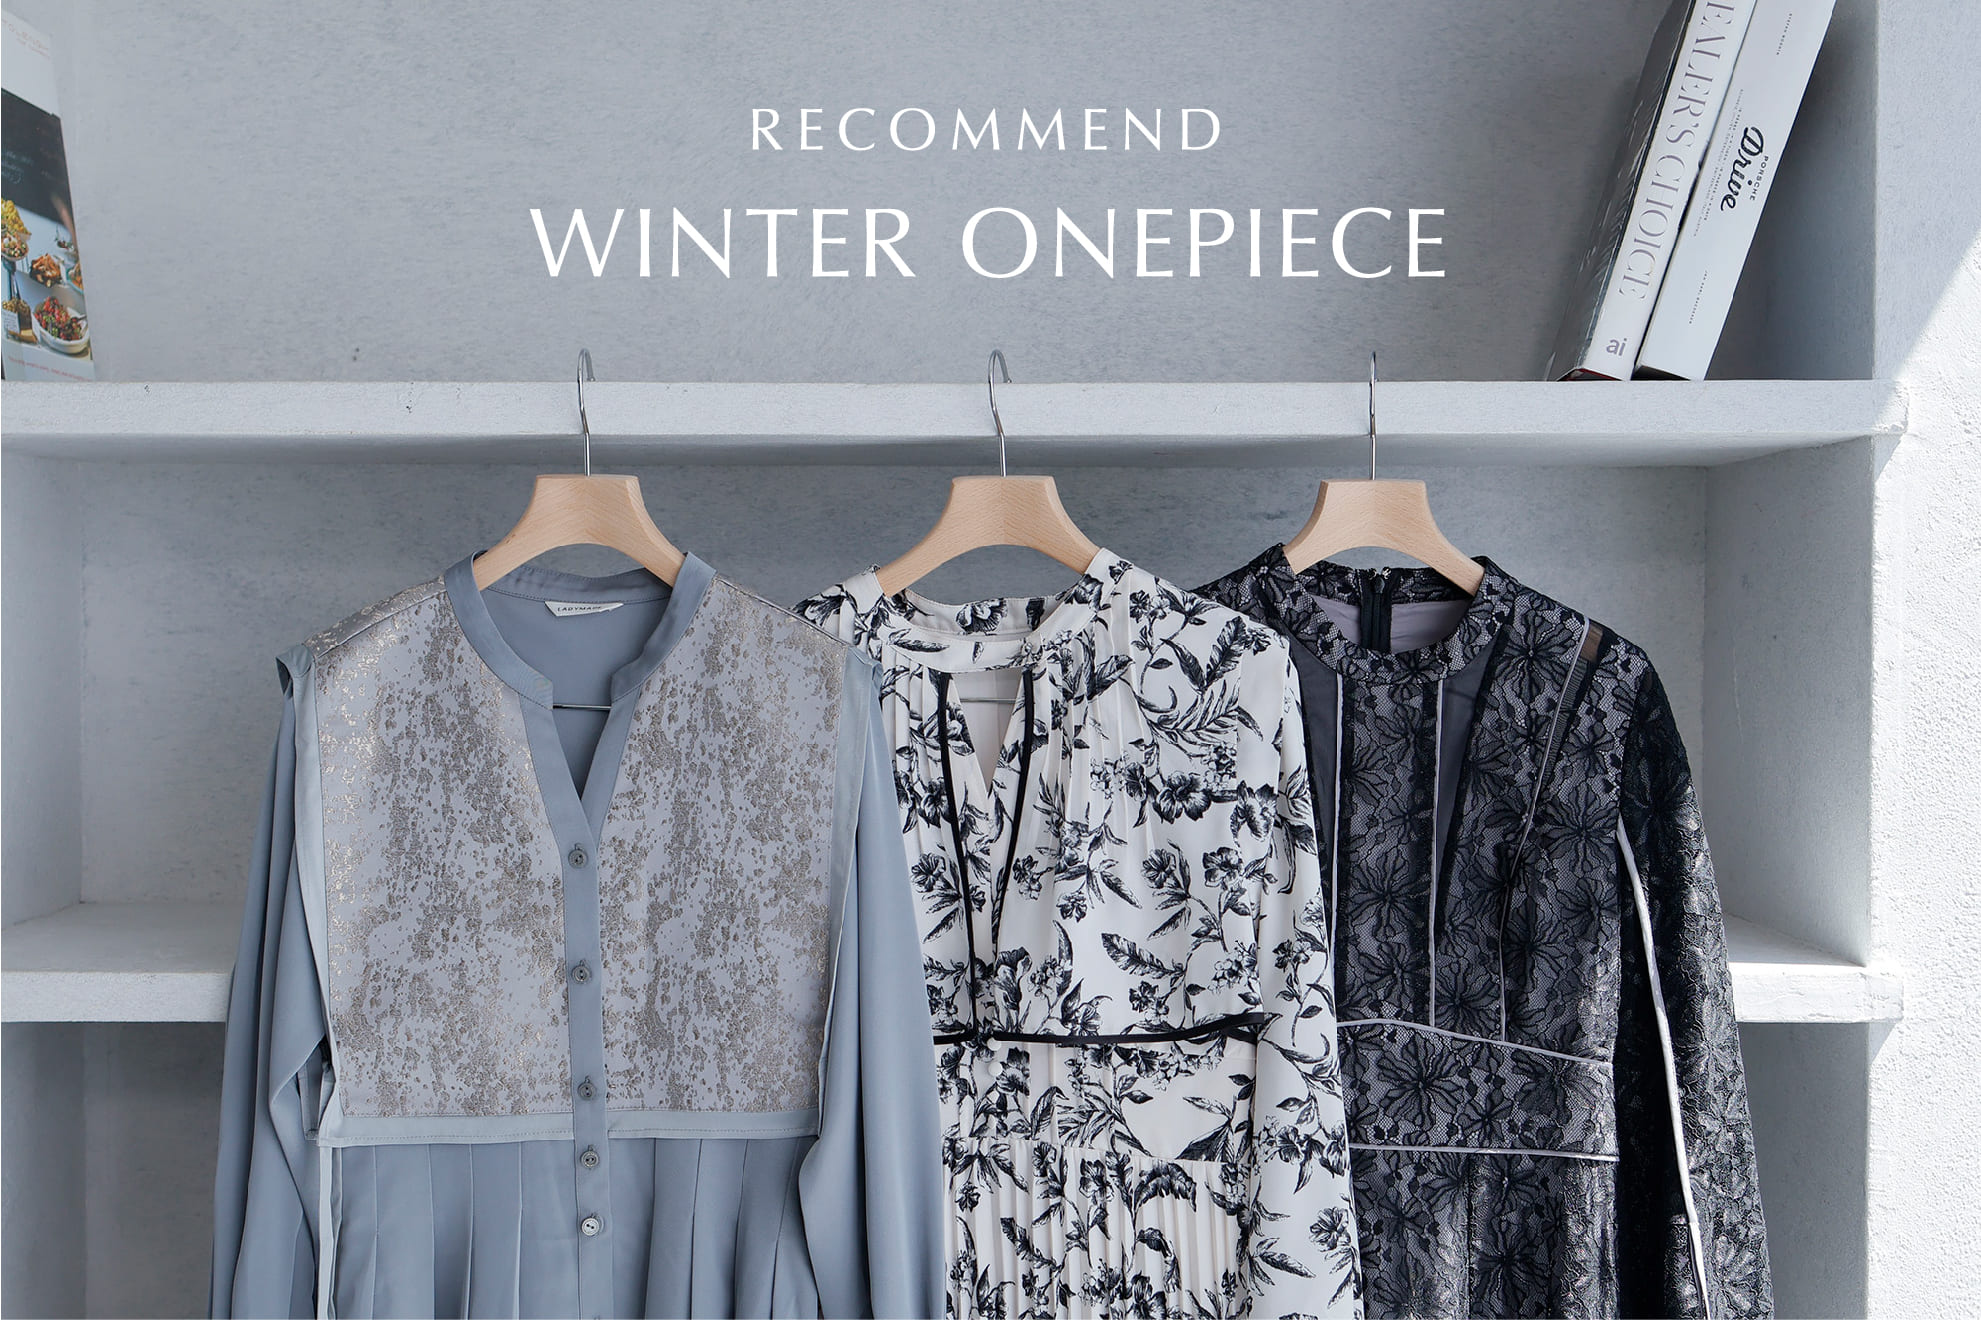 RECOMMEND WINTER ONEPIECE